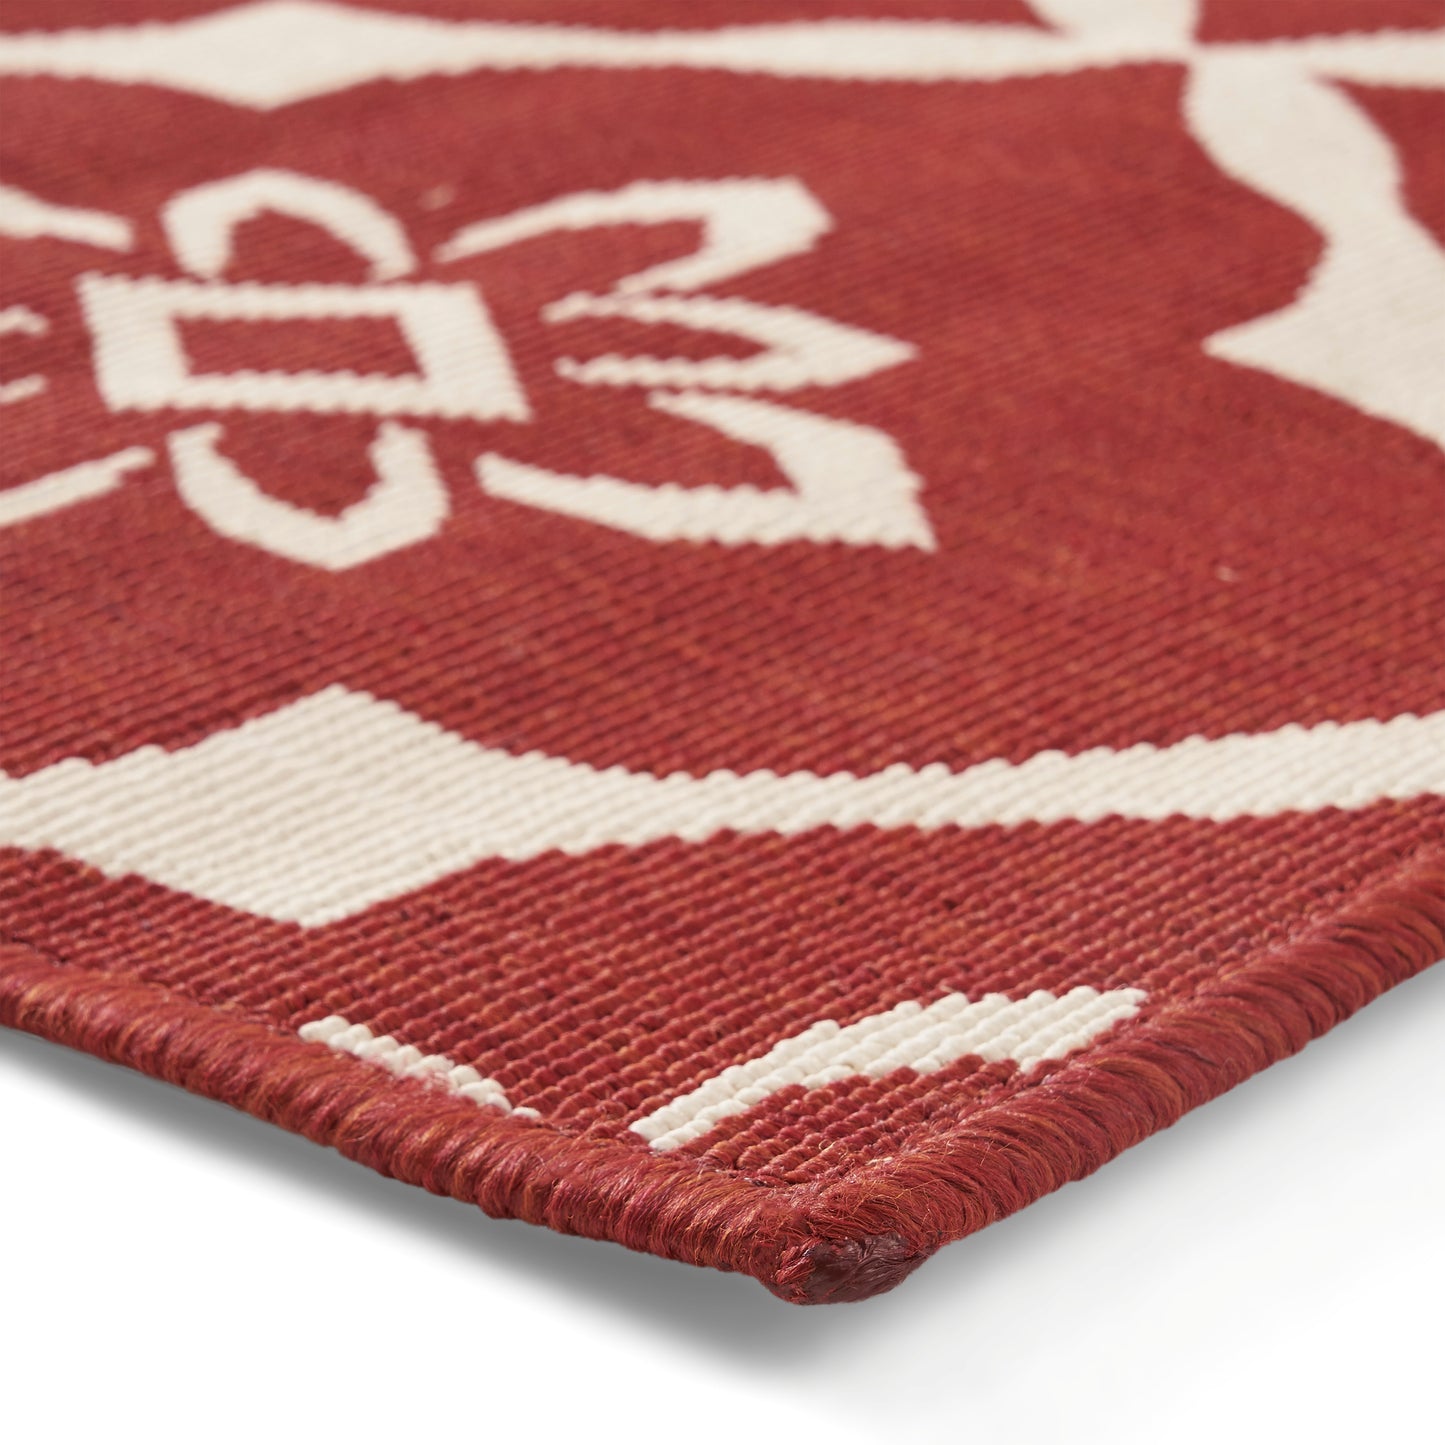 Eluzer Outdoor Trellis Area Rug, Red and Ivory